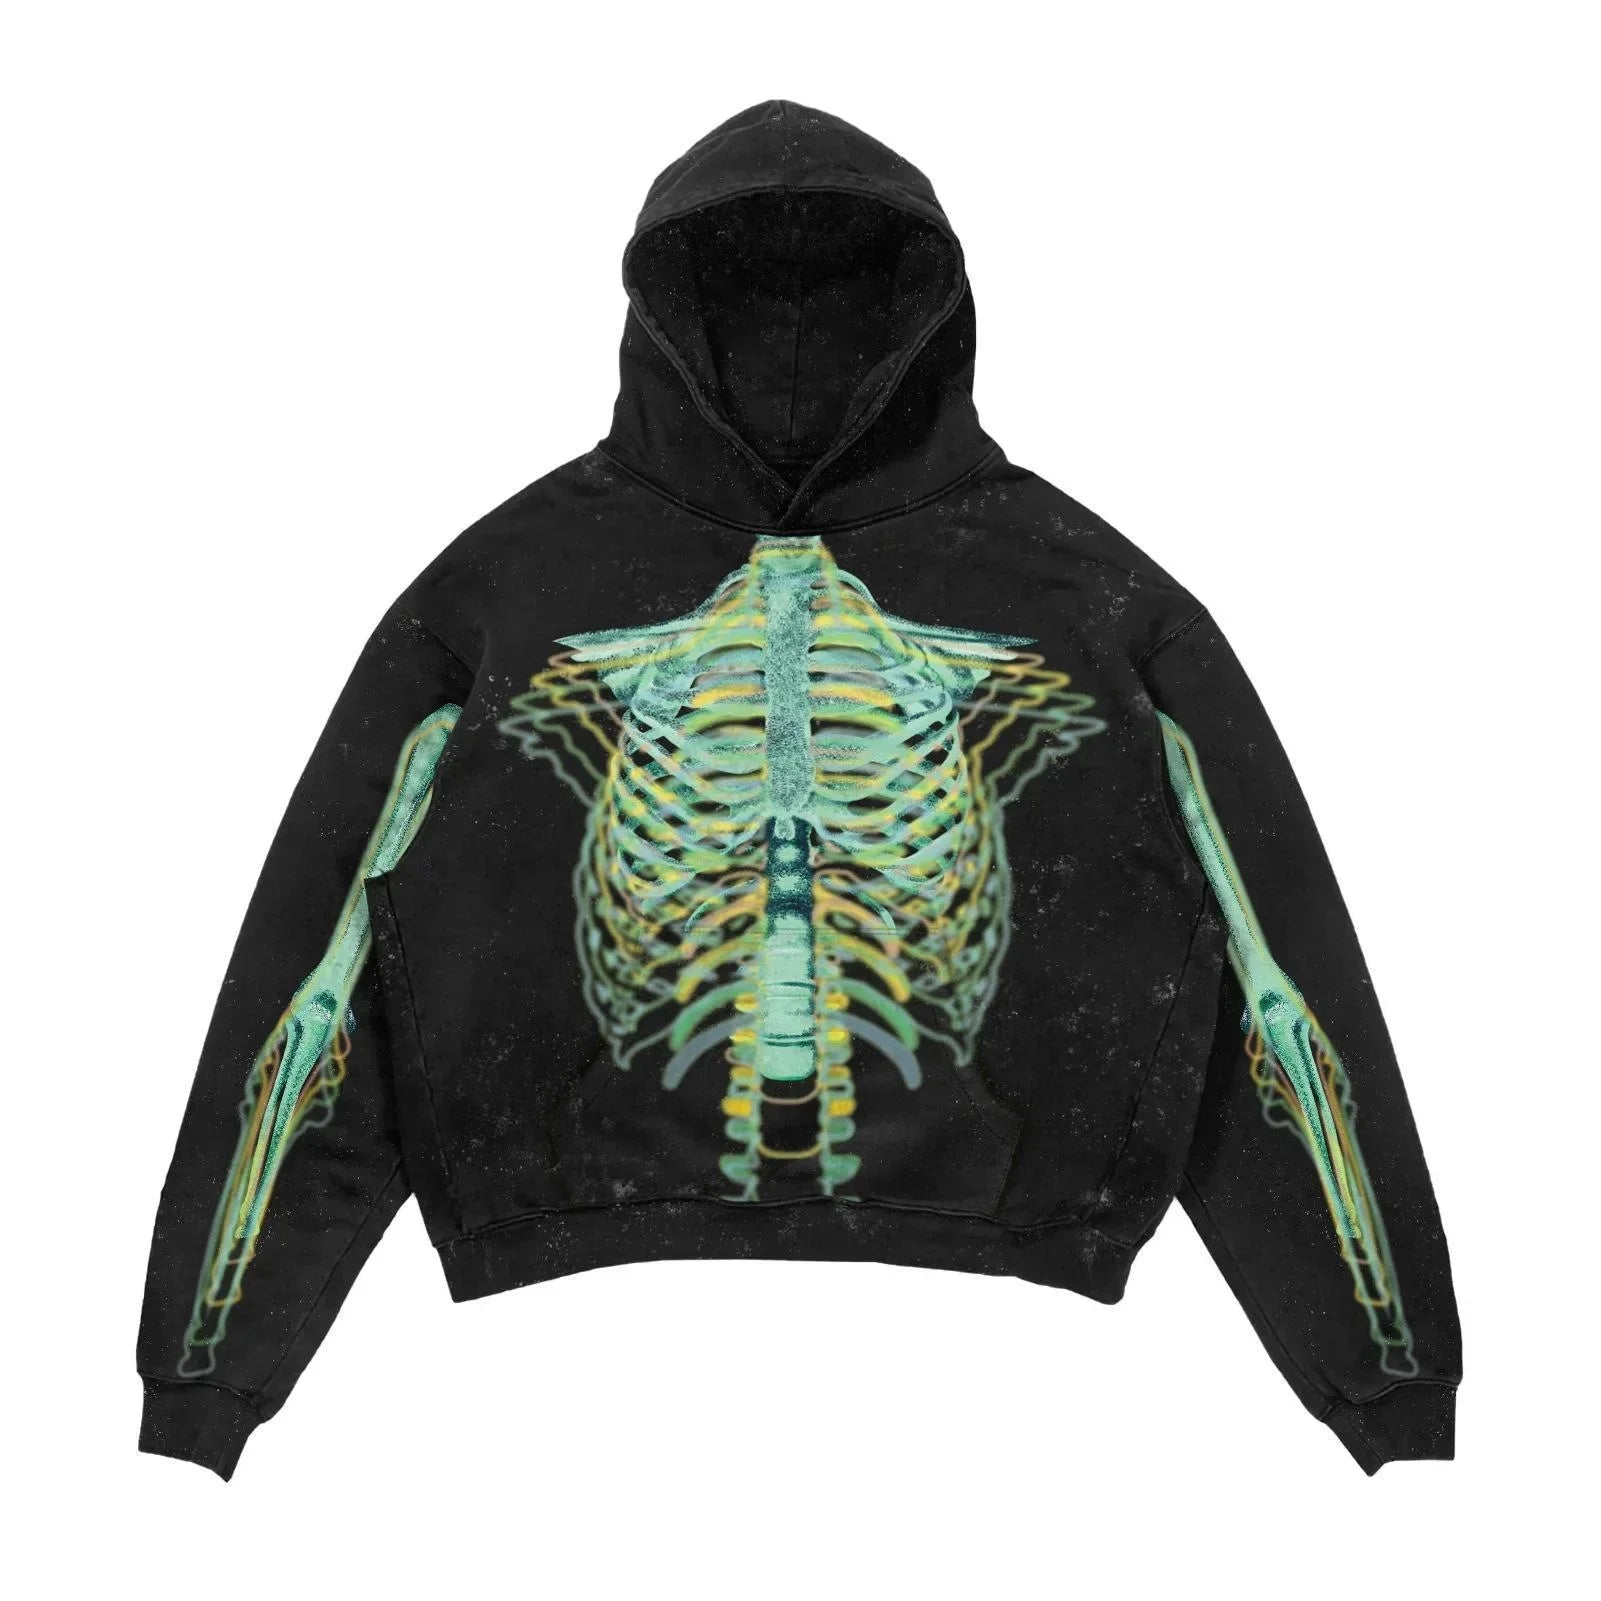 Black hooded sweatshirt with a punk style print of a human ribcage and arm bones in green hues on the front, crafted from durable polyester. Maramalive™ Explosions Printed Skull Y2K Retro Hooded Sweater Coat Street Style Gothic Casual Fashion Hooded Sweater Men's Female.